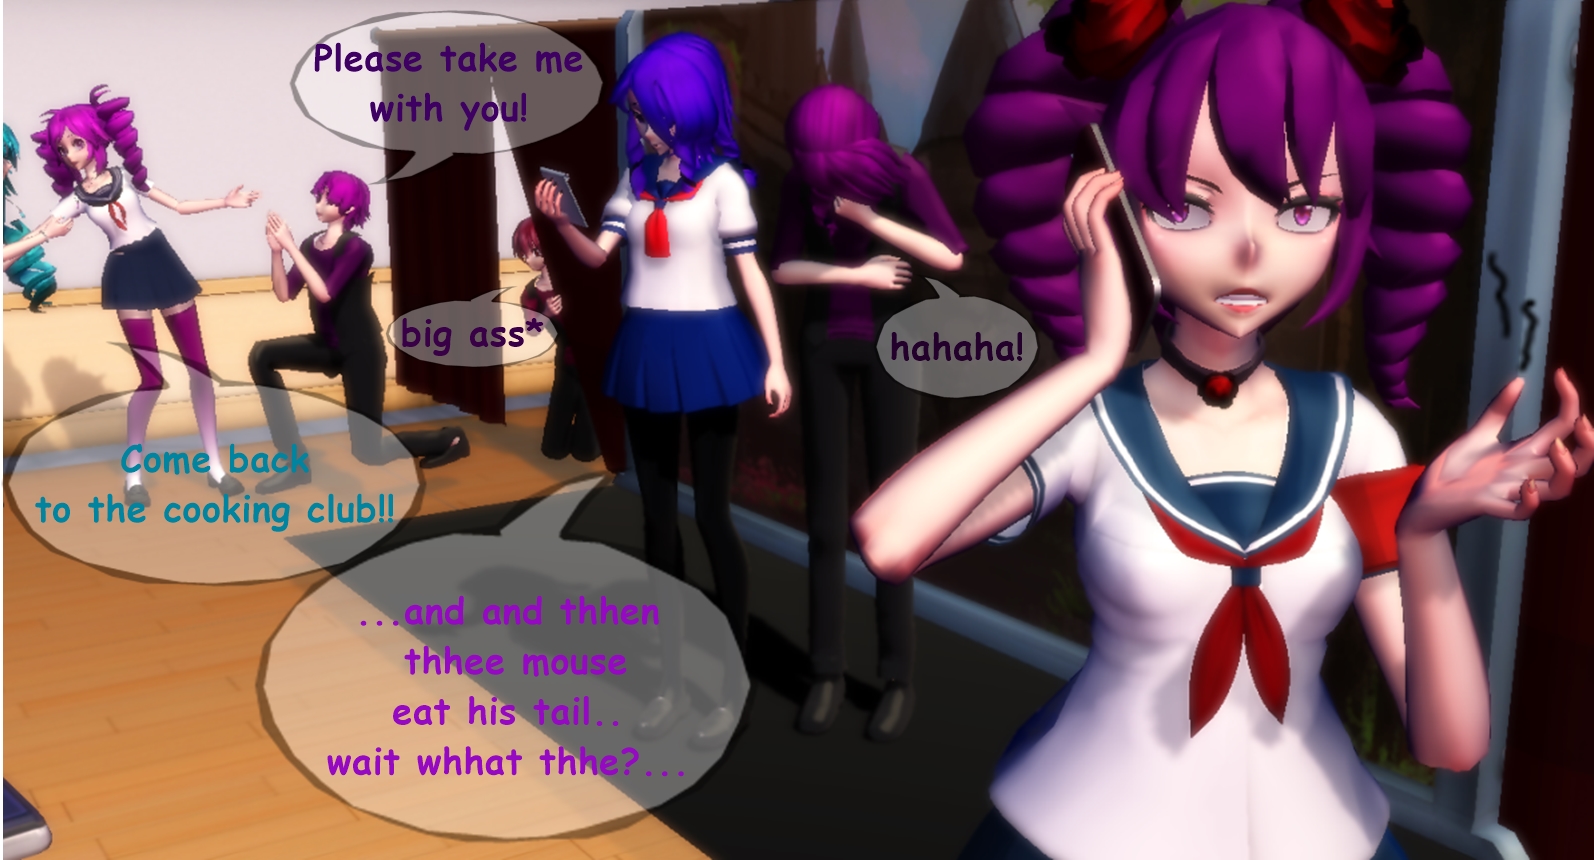 Mmd Yandere Simulator Welcome To The Drama Club By Stefy5000 On Deviantart